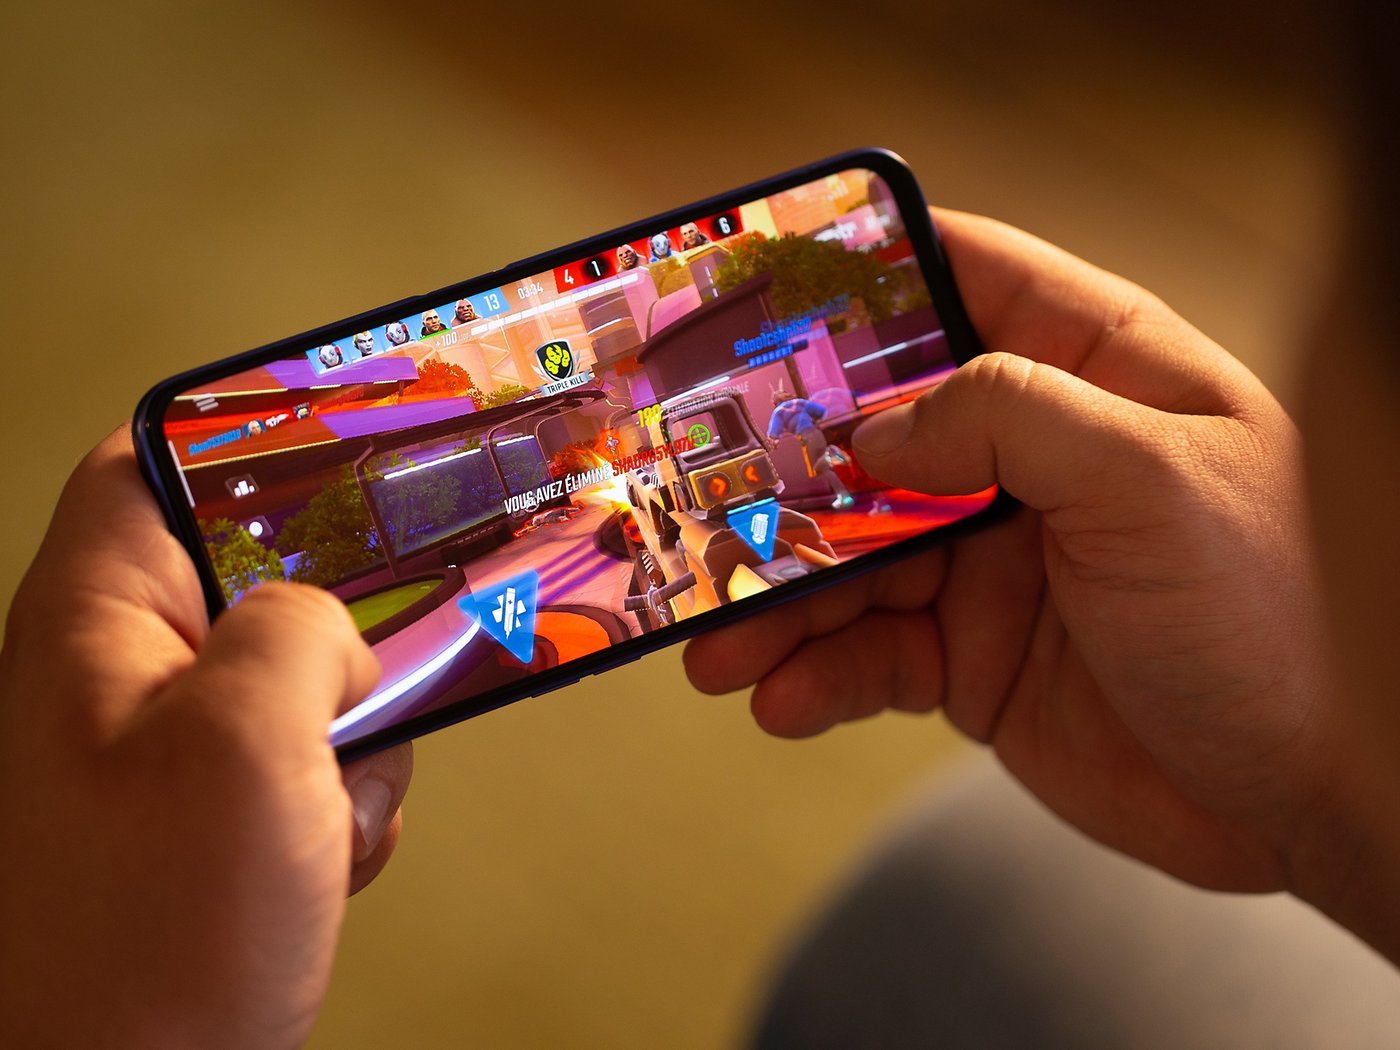 How to Get Started with Multiplayer Gaming on Smartphones: Tips for Finding the Right Games and Getting Connected